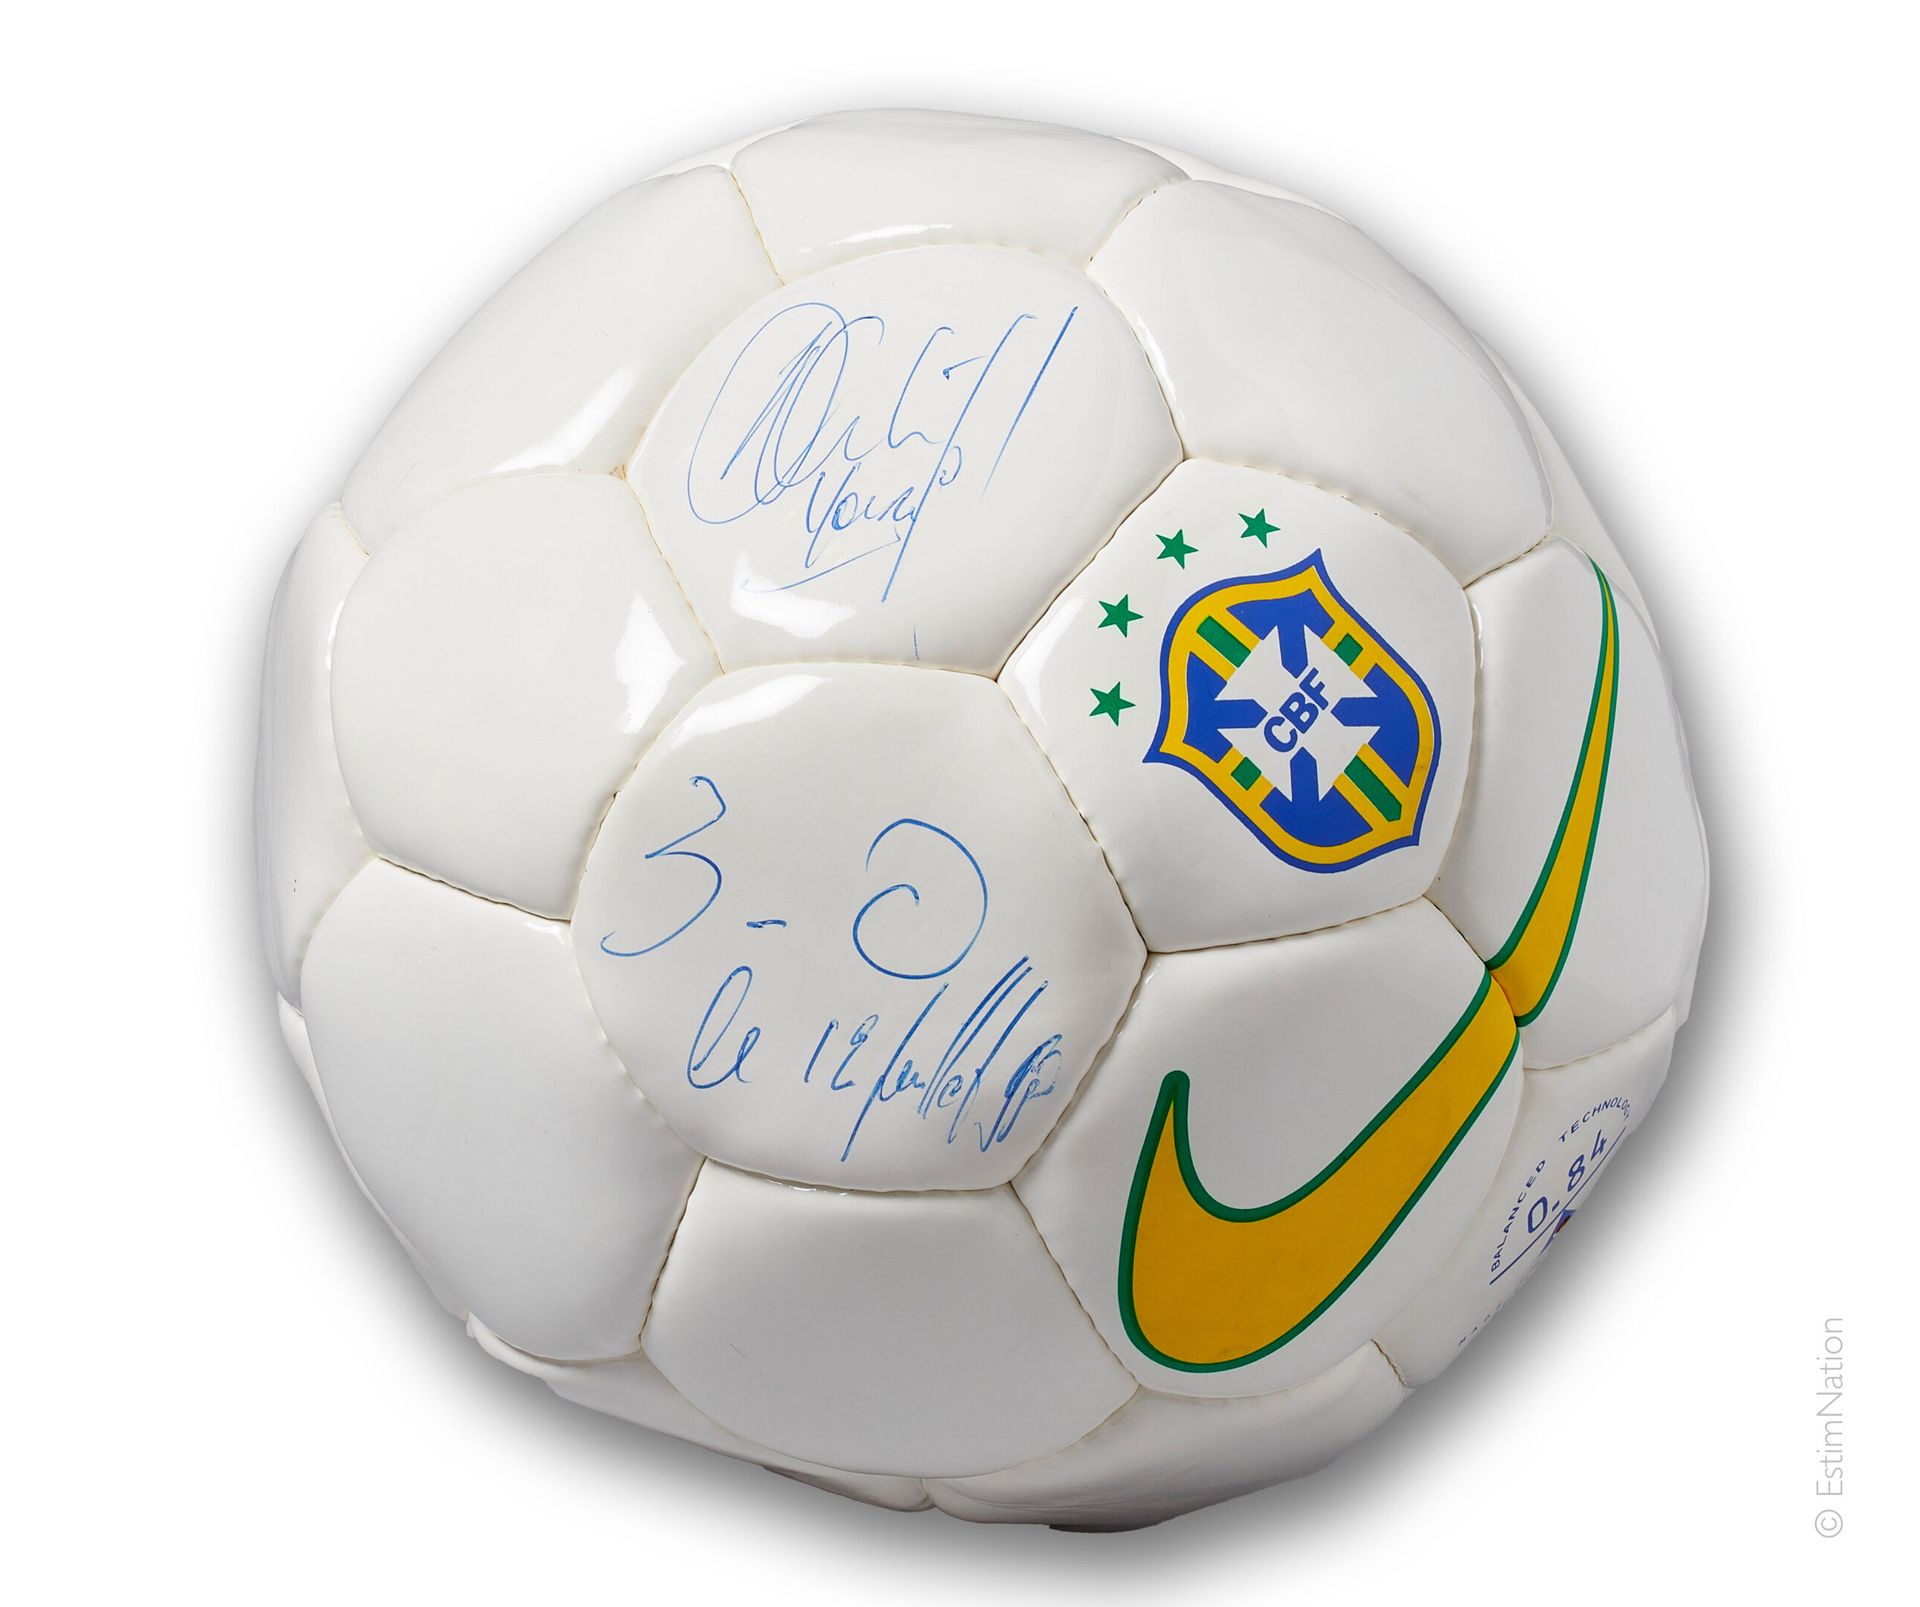 FIFA COUPE DU MONDE FRANCE 1998 FINALE - YOURI DJORKAEFF Official ball of the te&hellip;